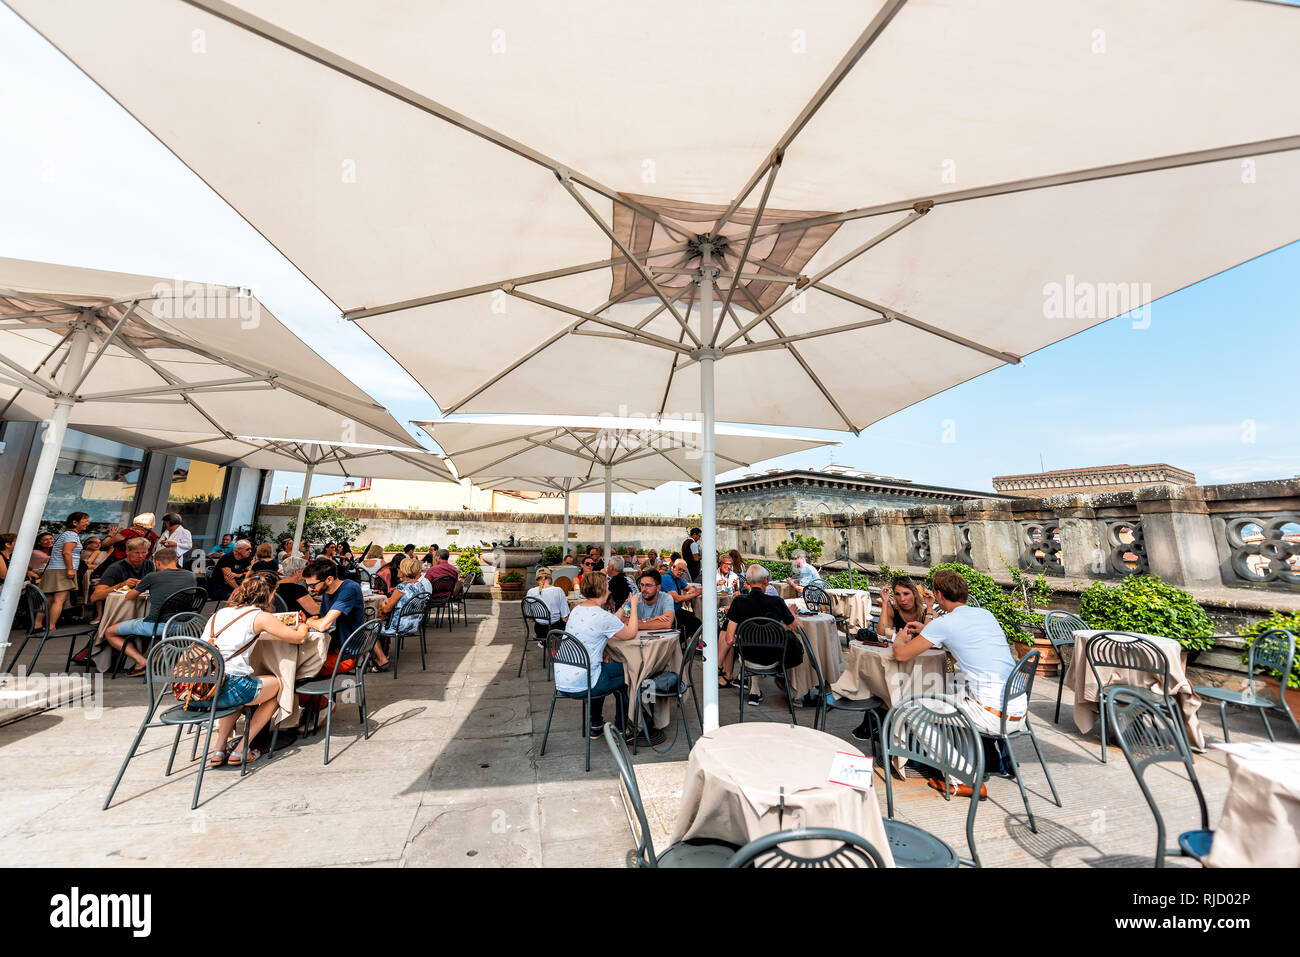 Firenze, Italy - August 30, 2018: Many people by cafe on terrace of famous Florence Uffizi art museum gallery with restaurant and shade cover Stock Photo